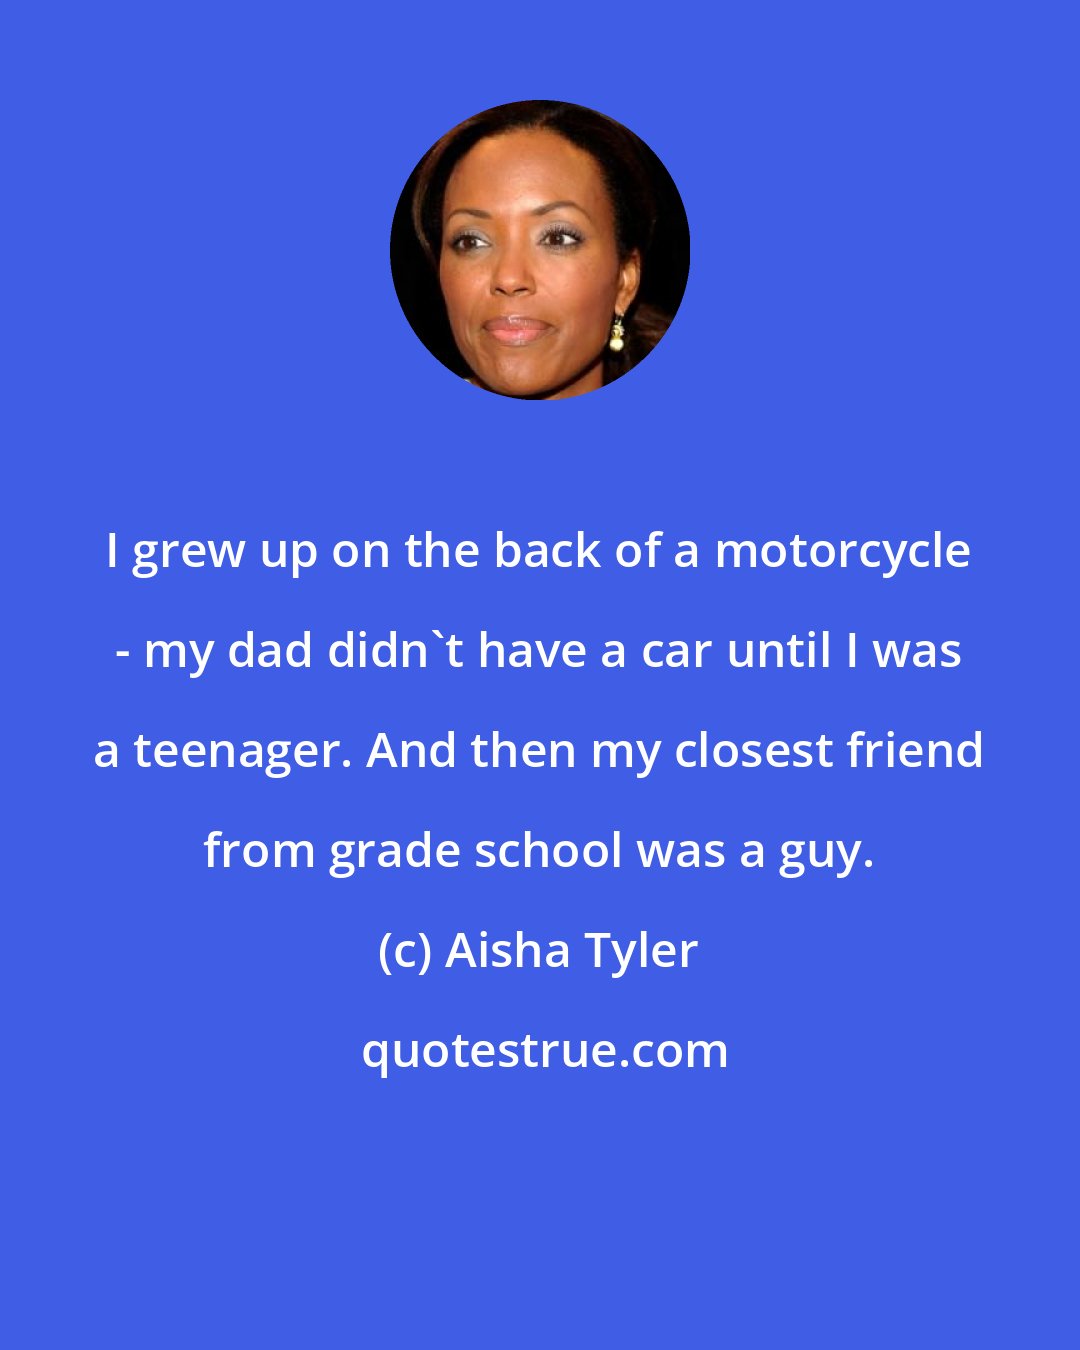 Aisha Tyler: I grew up on the back of a motorcycle - my dad didn't have a car until I was a teenager. And then my closest friend from grade school was a guy.